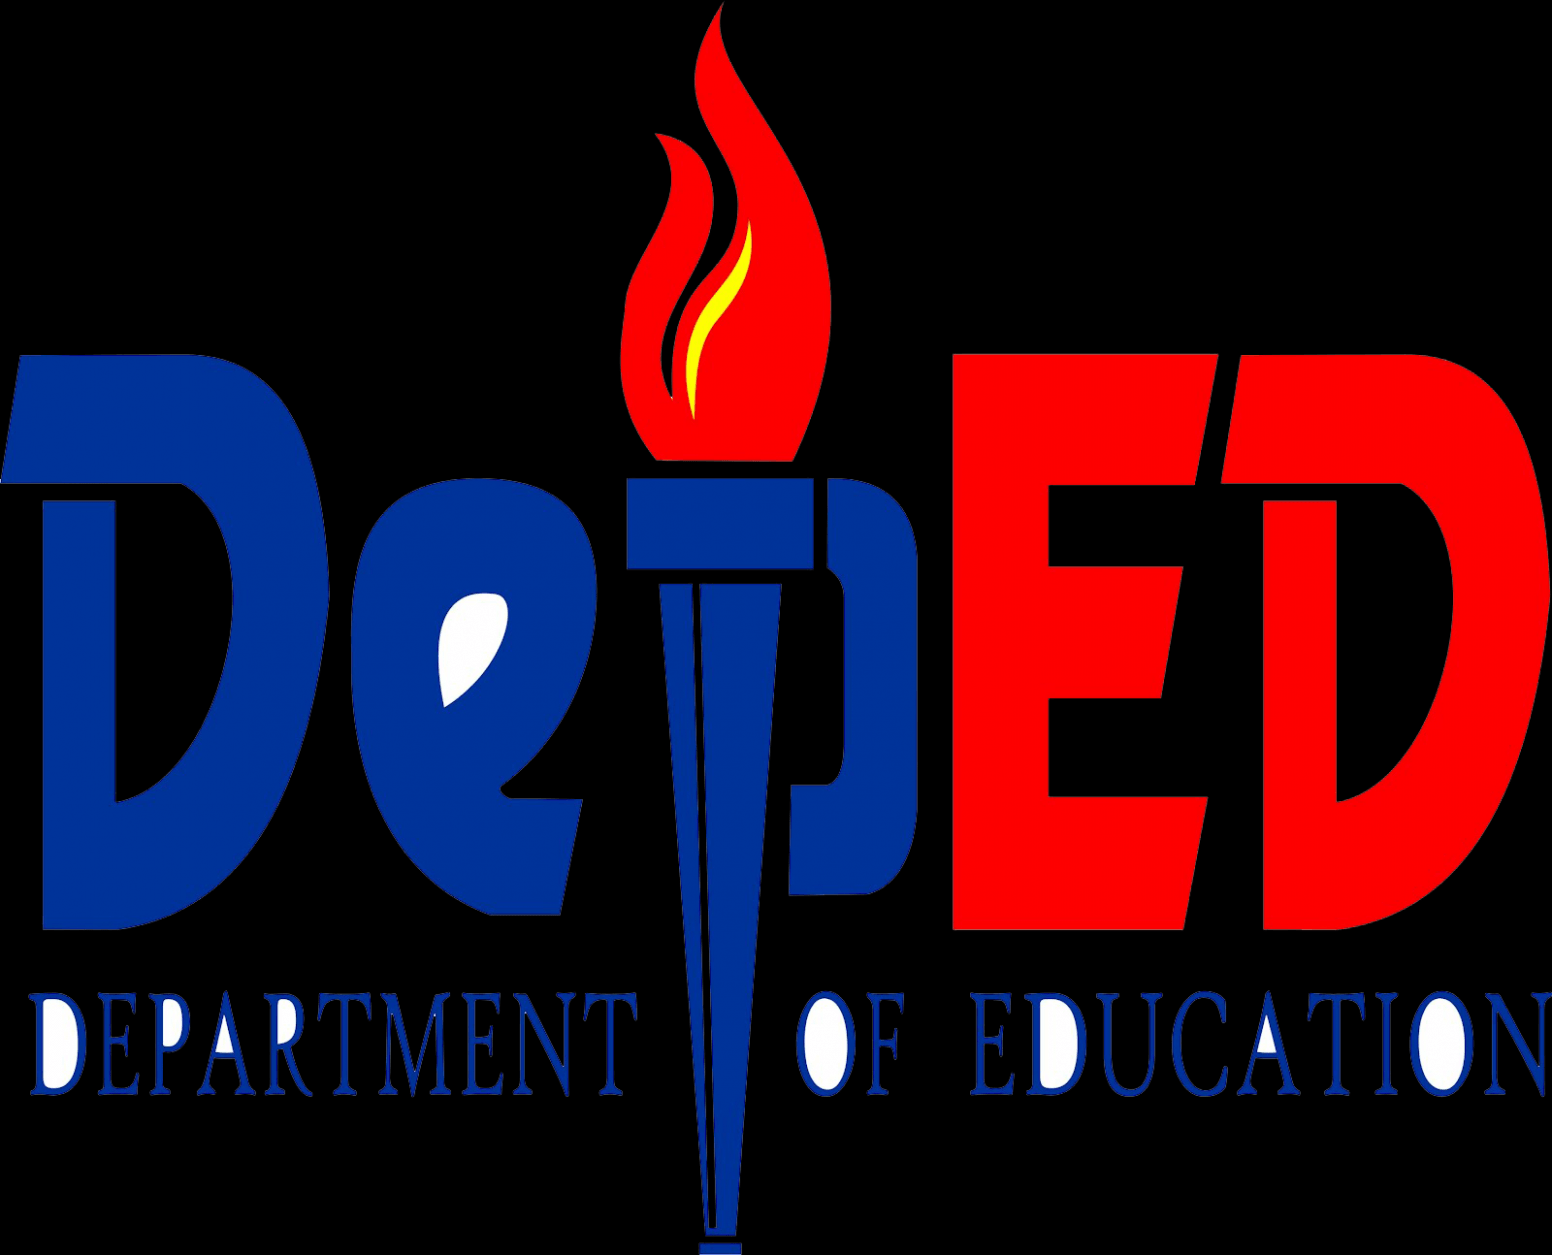 DepEd Logo - Unconventional Knowledge About Logo That You